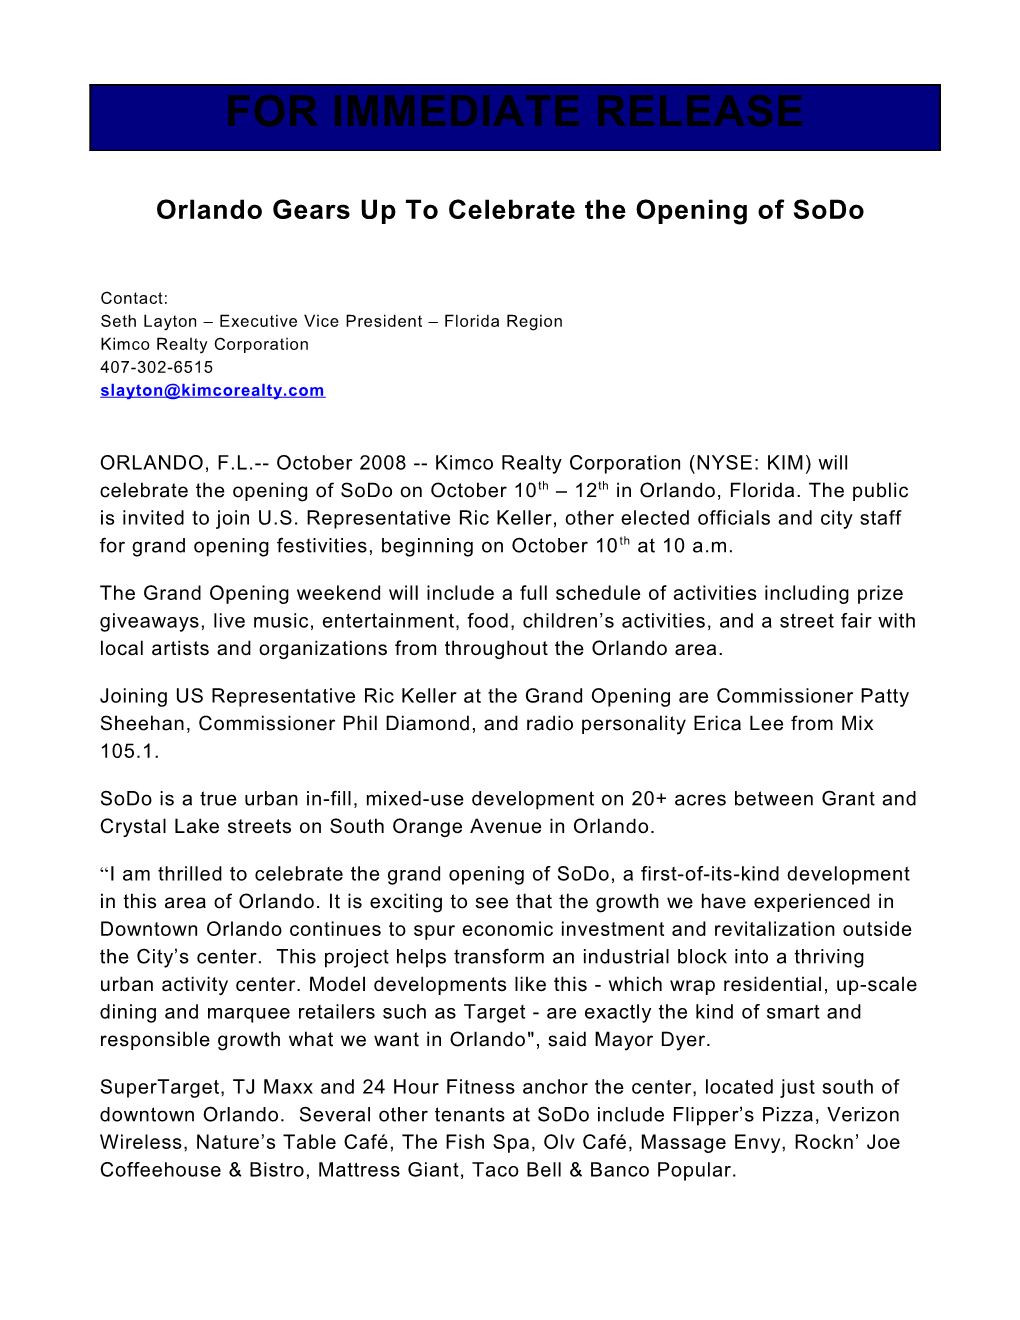 Orlando Gears up to Celebrate the Opening of Sodo